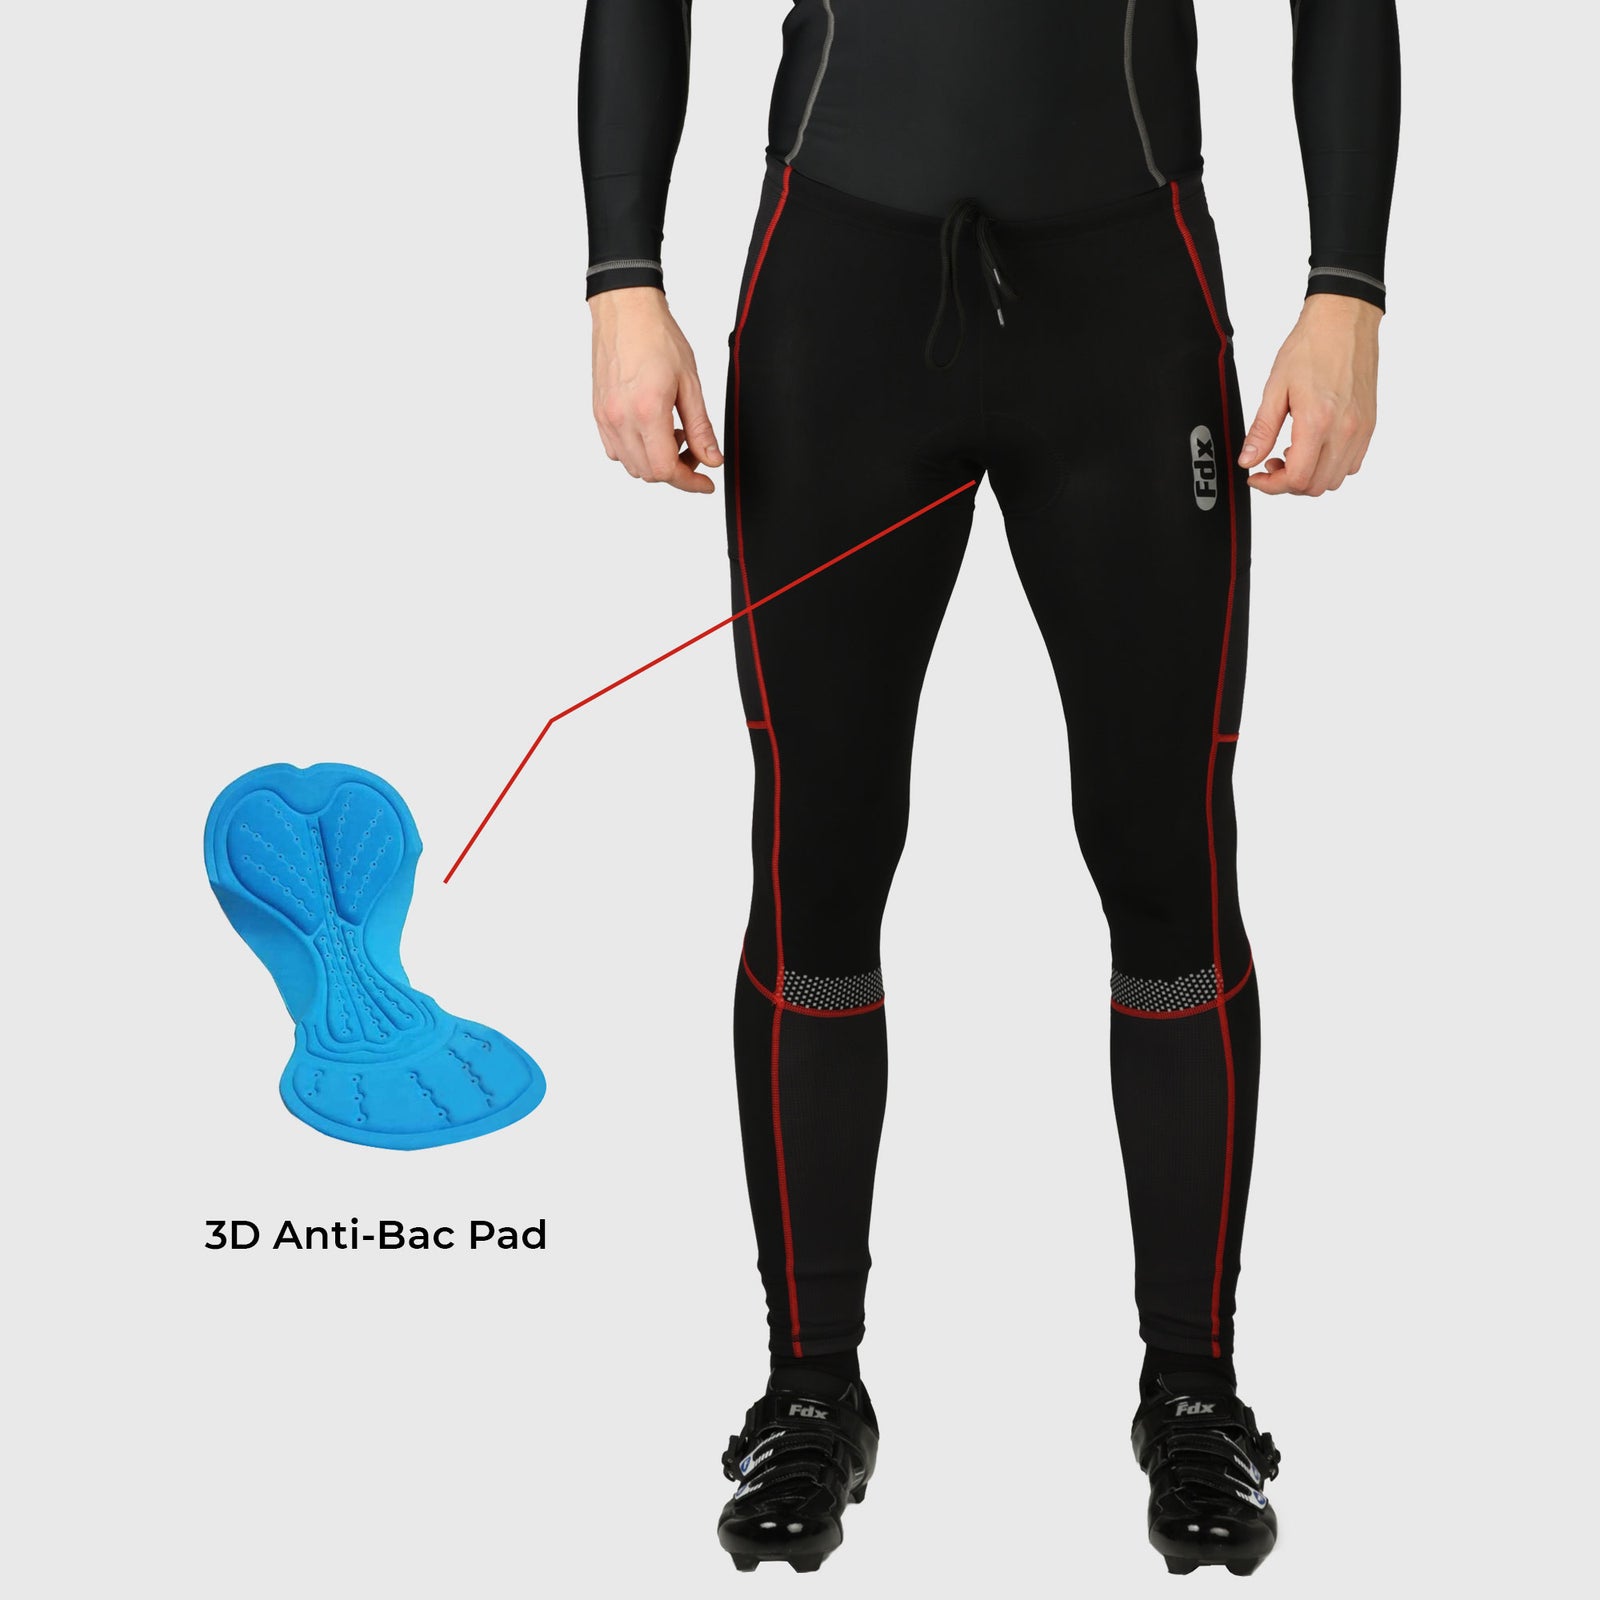 Fdx All Day Men's Padded Winter Cycling Tights Blue, Black & Red